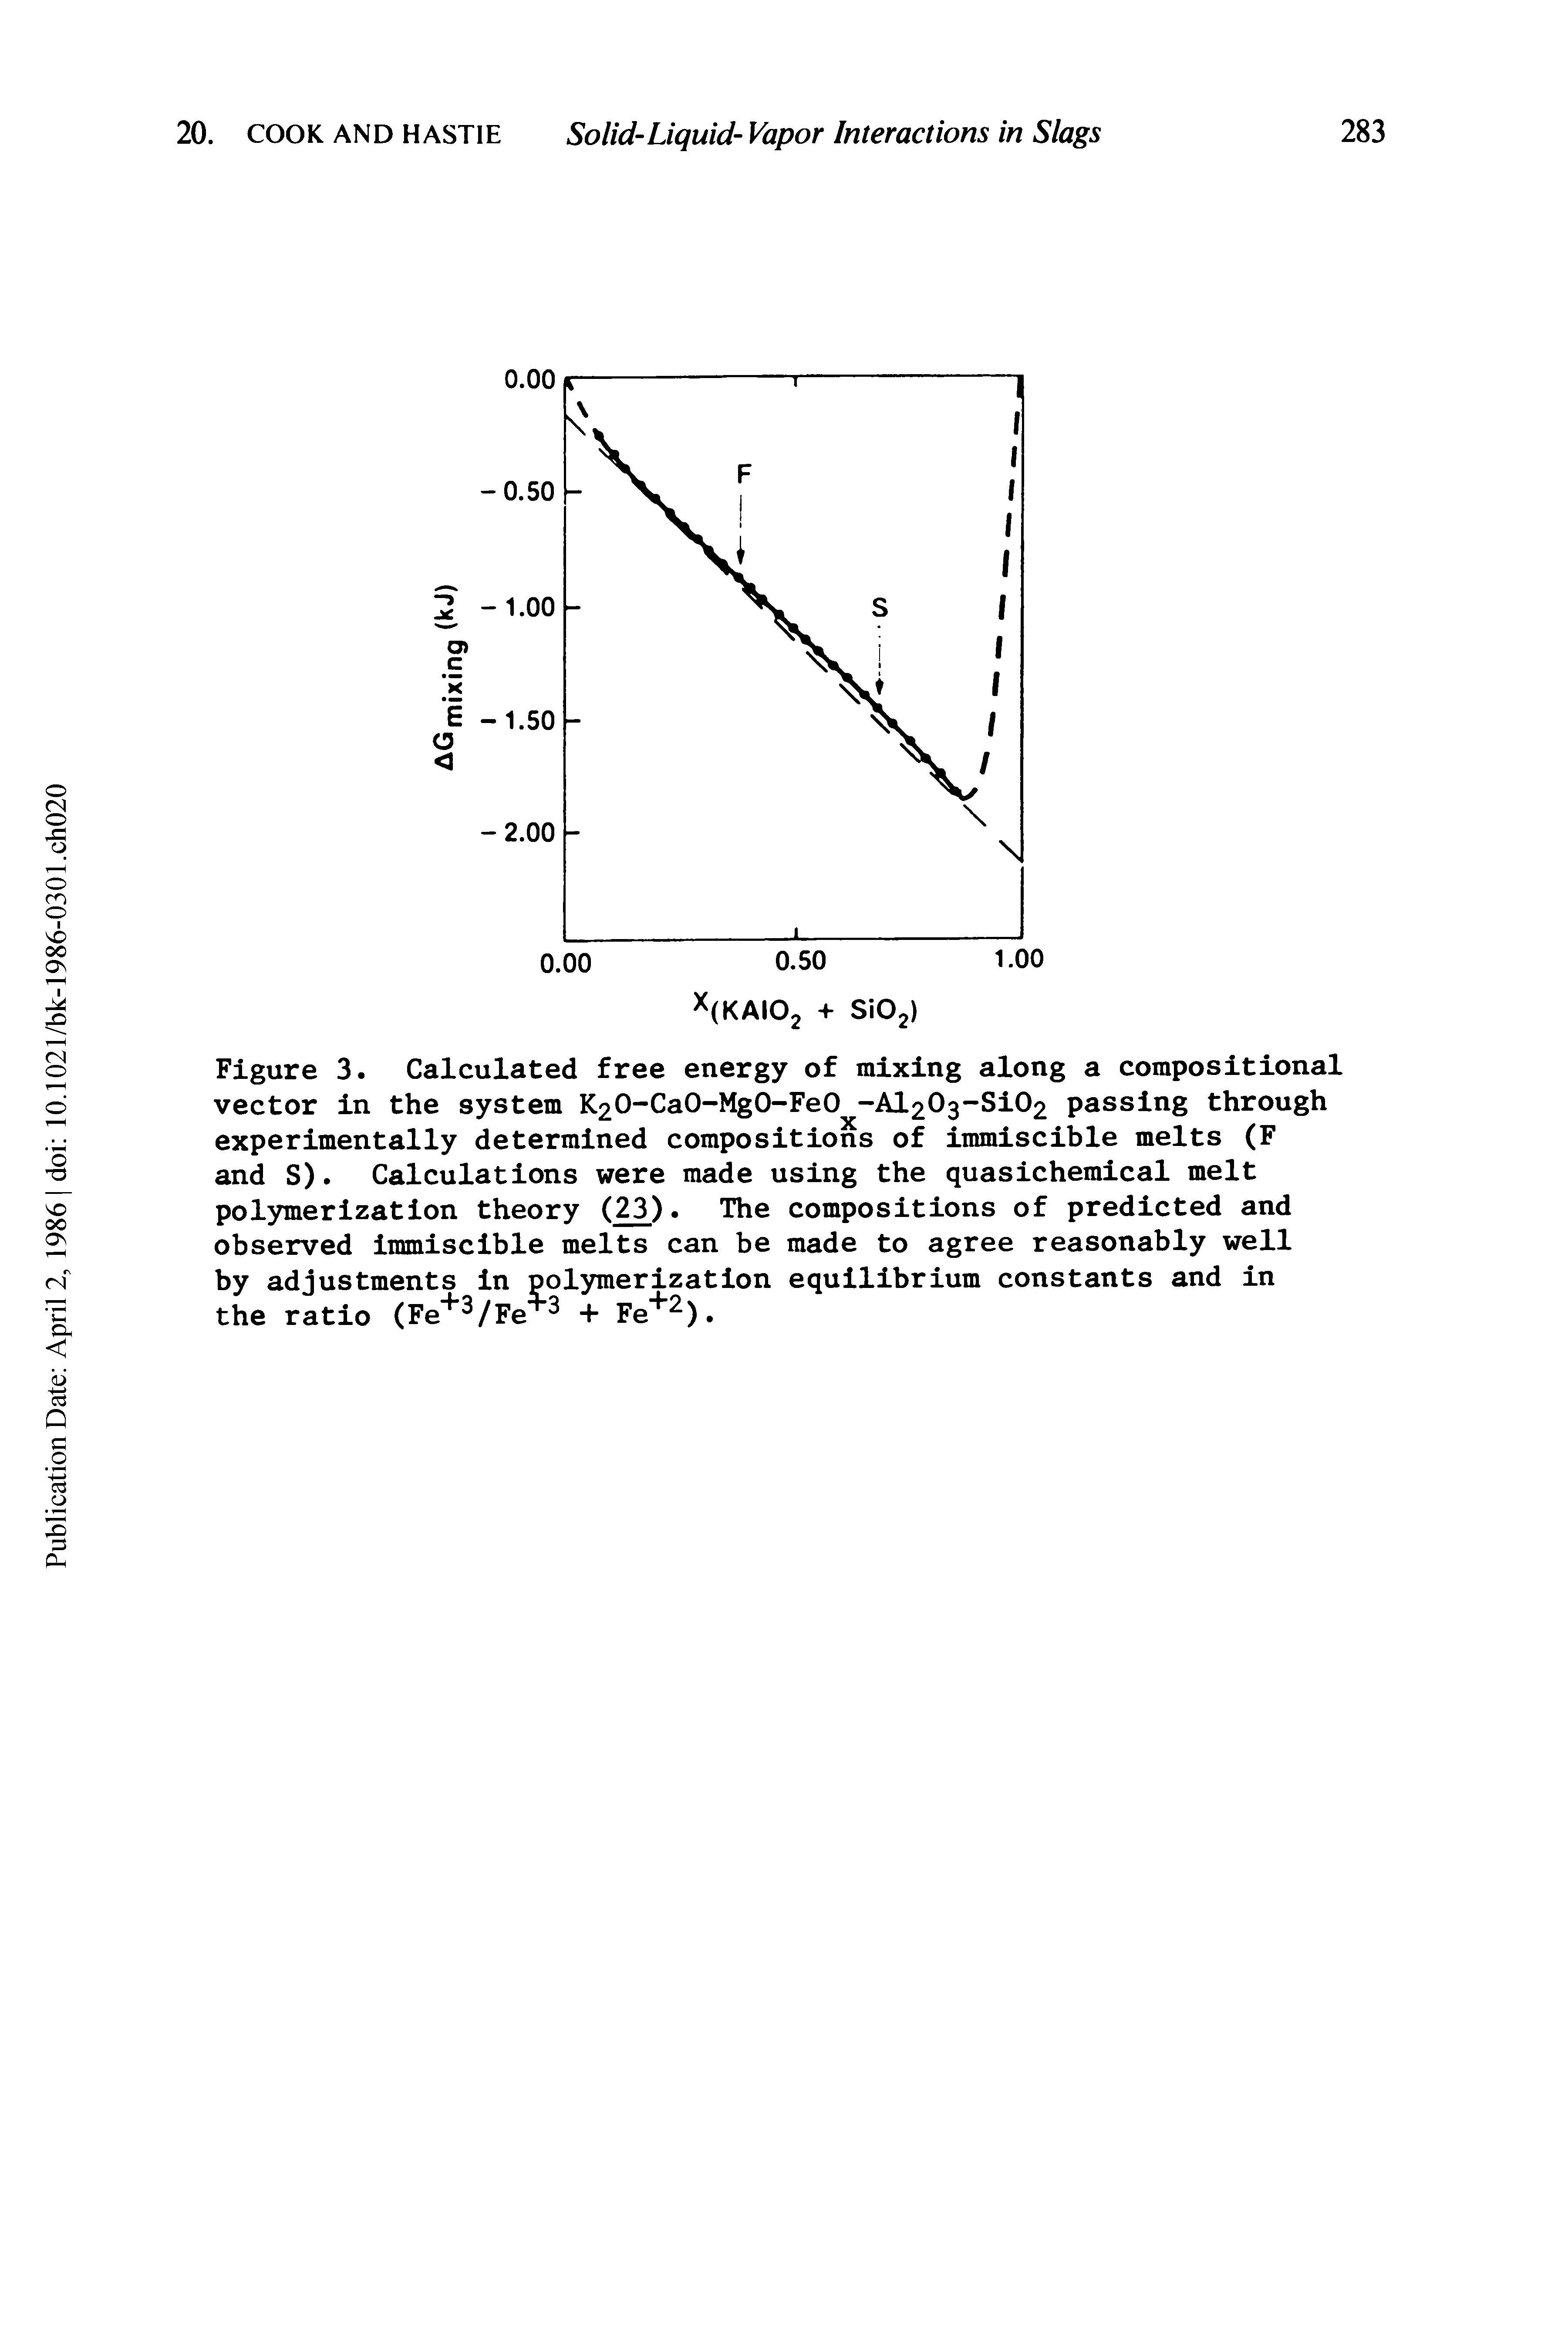 Figure 3. Calculated free energy of mixing along a compositional vector in the system K2O-CaO-MgO-FeO -Al2O3-SiO2 passing through experimentally determined compositions of immiscible melts (F and S). Calculations were made using the quasichemical melt polymerization theory (23). The compositions of predicted and observed immiscible melts can be made to agree reasonably well by adjustments in polymerization equilibrium constants and in the ratio (Fe 3/Fe 3 +...